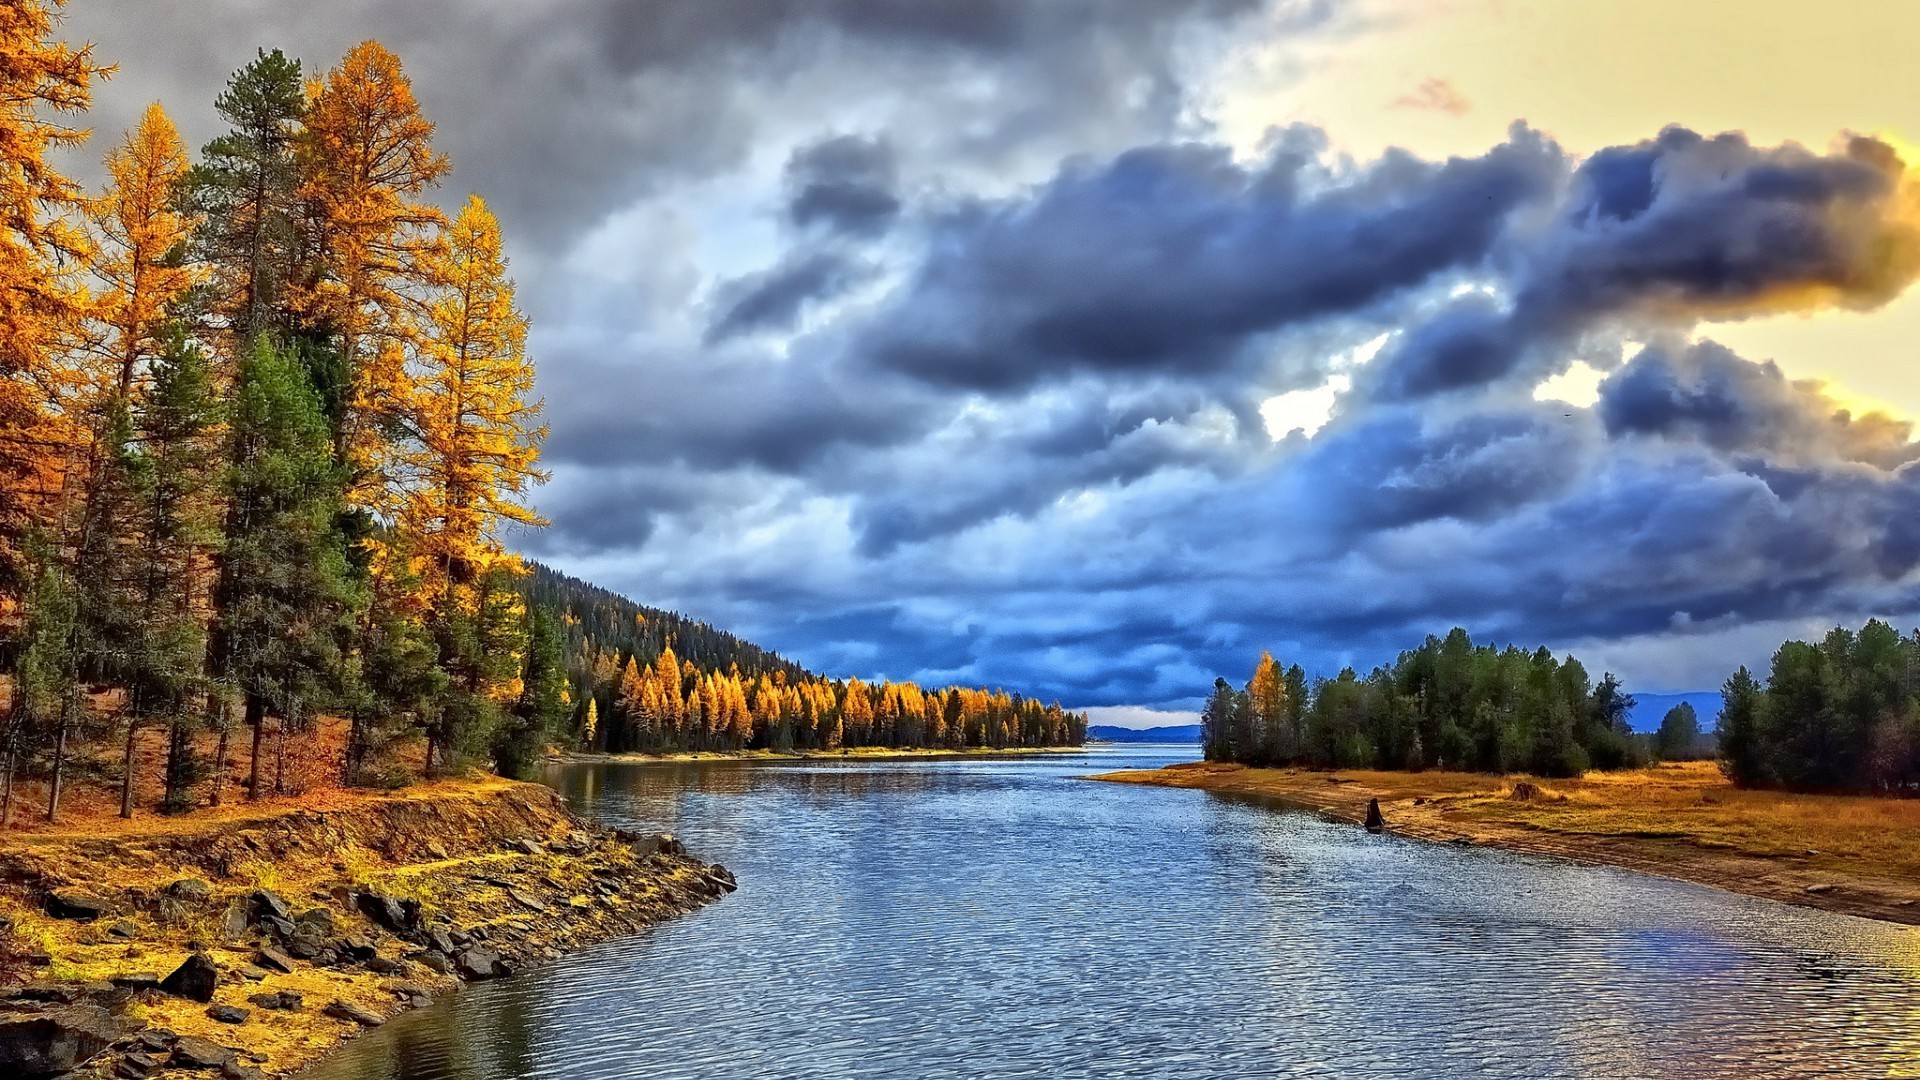 rivers ponds and streams water nature lake outdoors fall reflection landscape tree sky wood river travel scenic daylight dawn